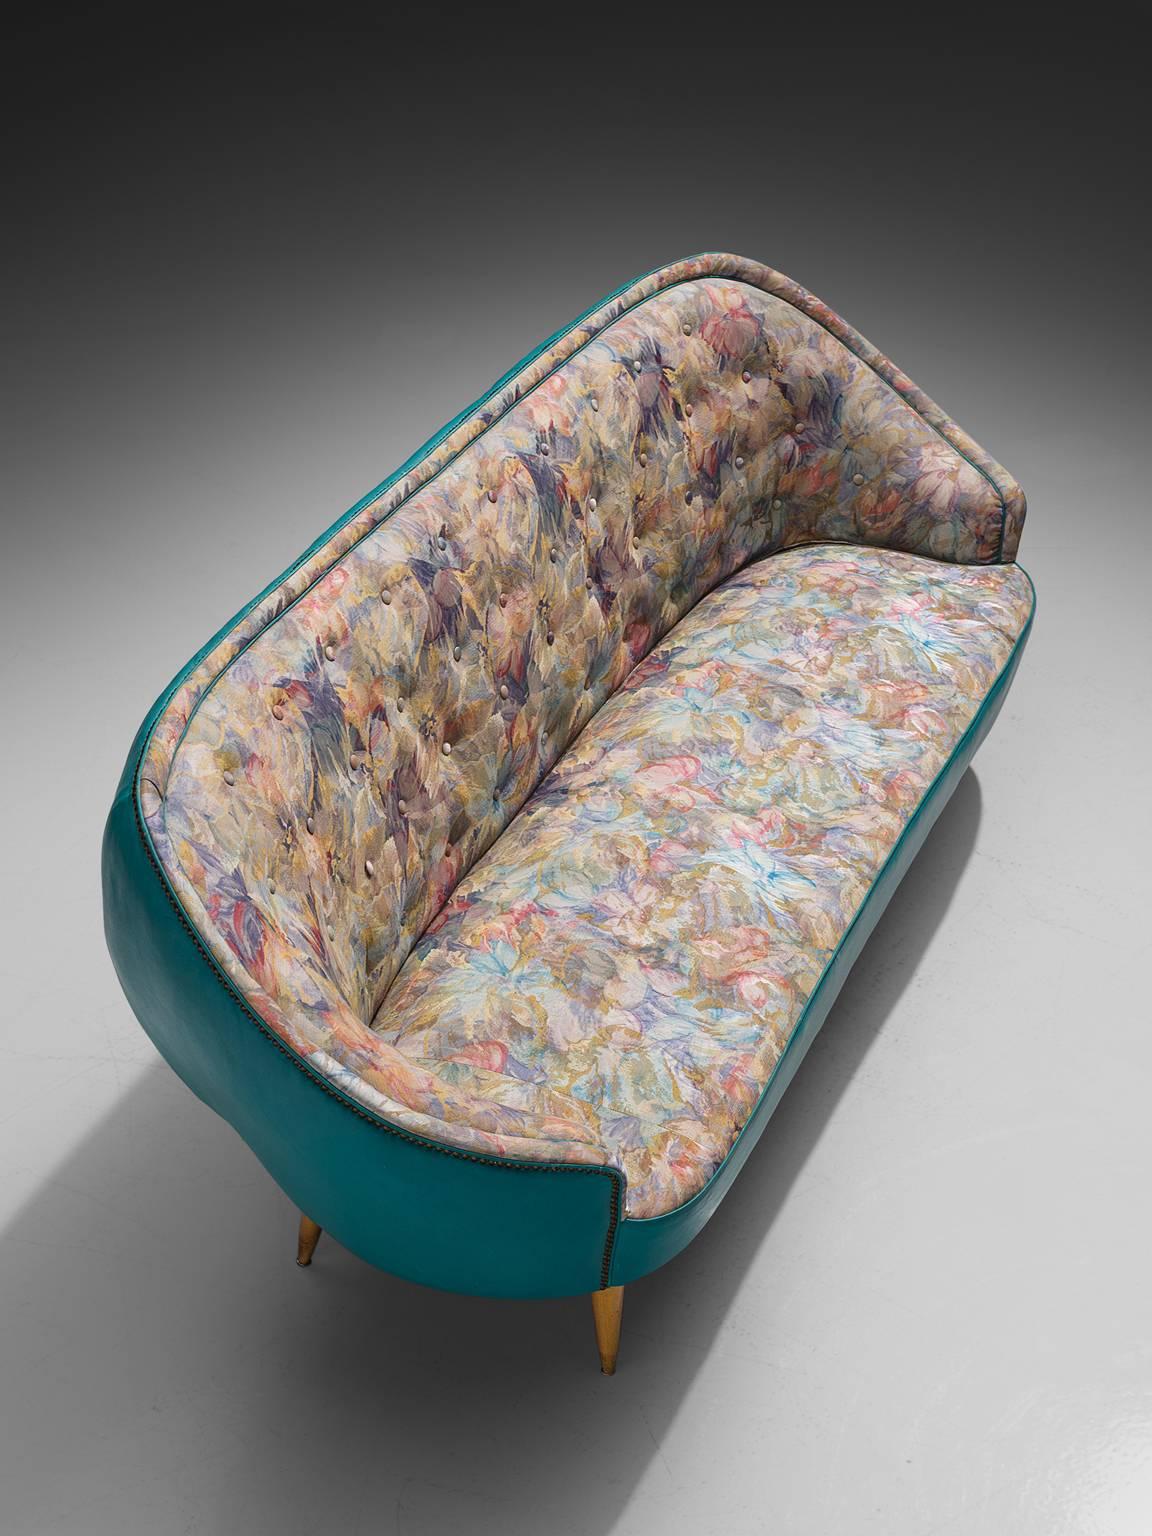 Mid-20th Century Italian Turquoise Sofa with Floral Upholstery, circa 1950